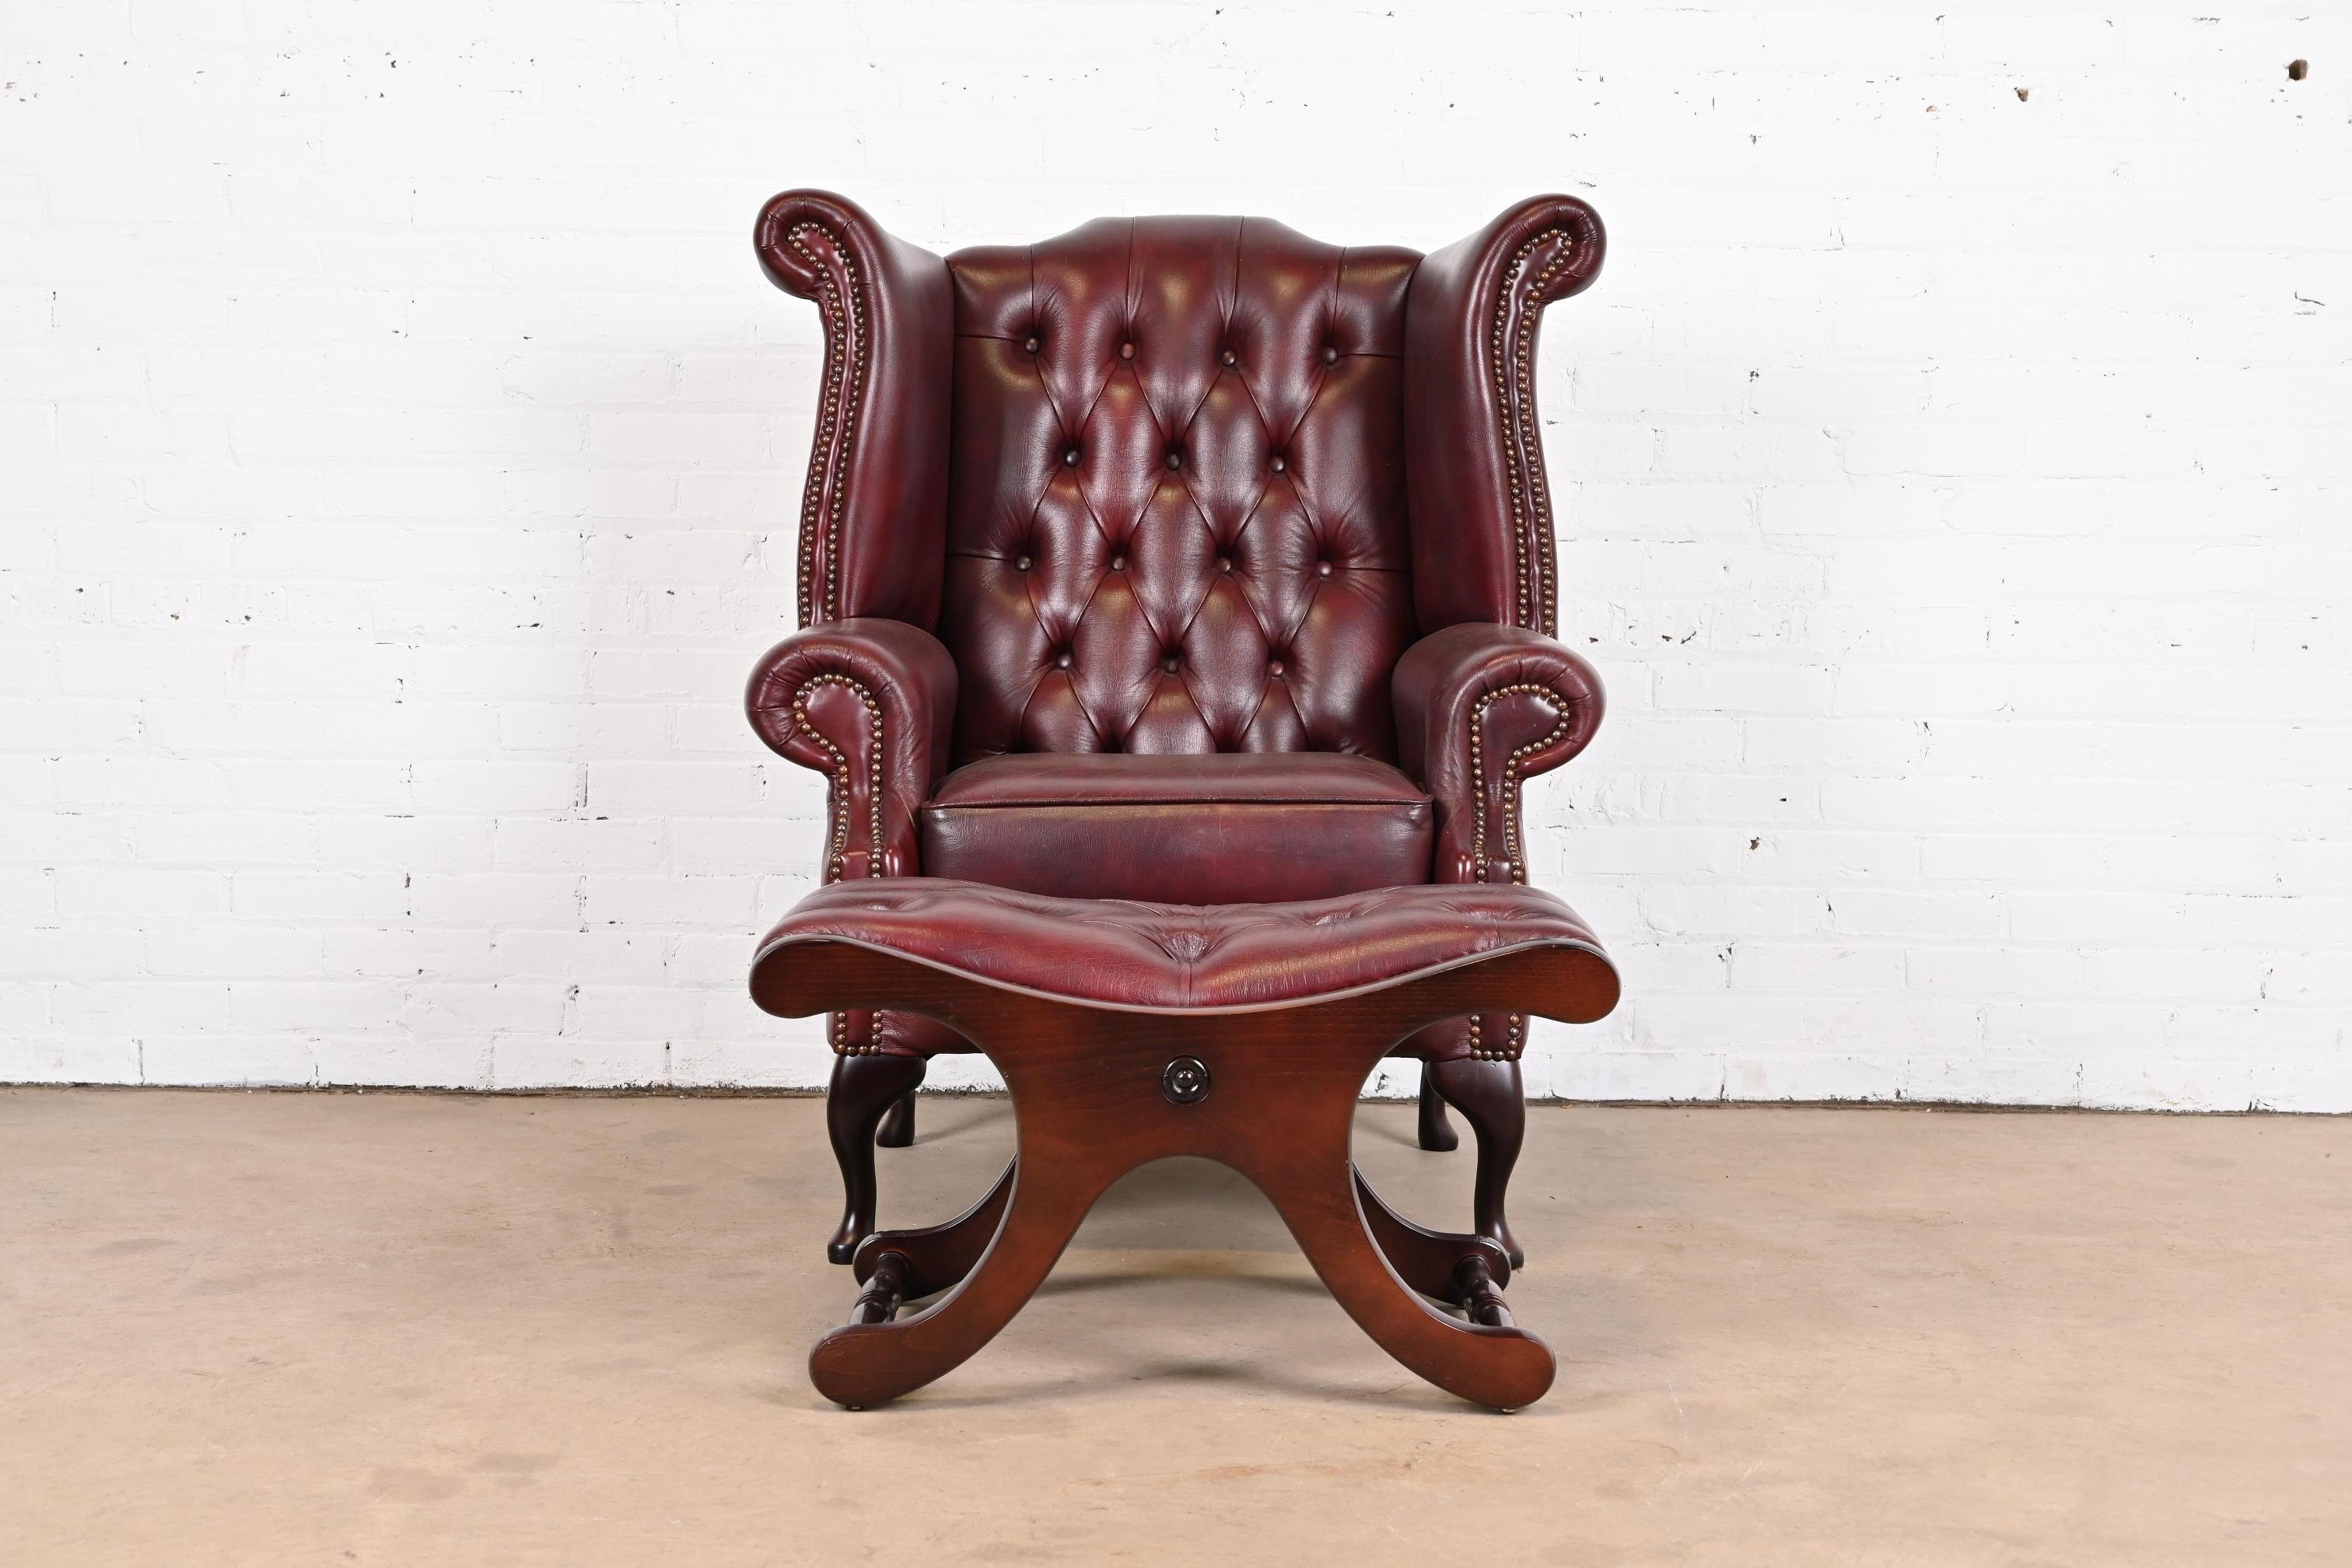 A gorgeous vintage Chesterfield wingback lounge chair with ottoman

England, Circa late 20th century

Tufted oxblood leather, with brass studs and mahogany legs.

Measures:
Chair: 35.5